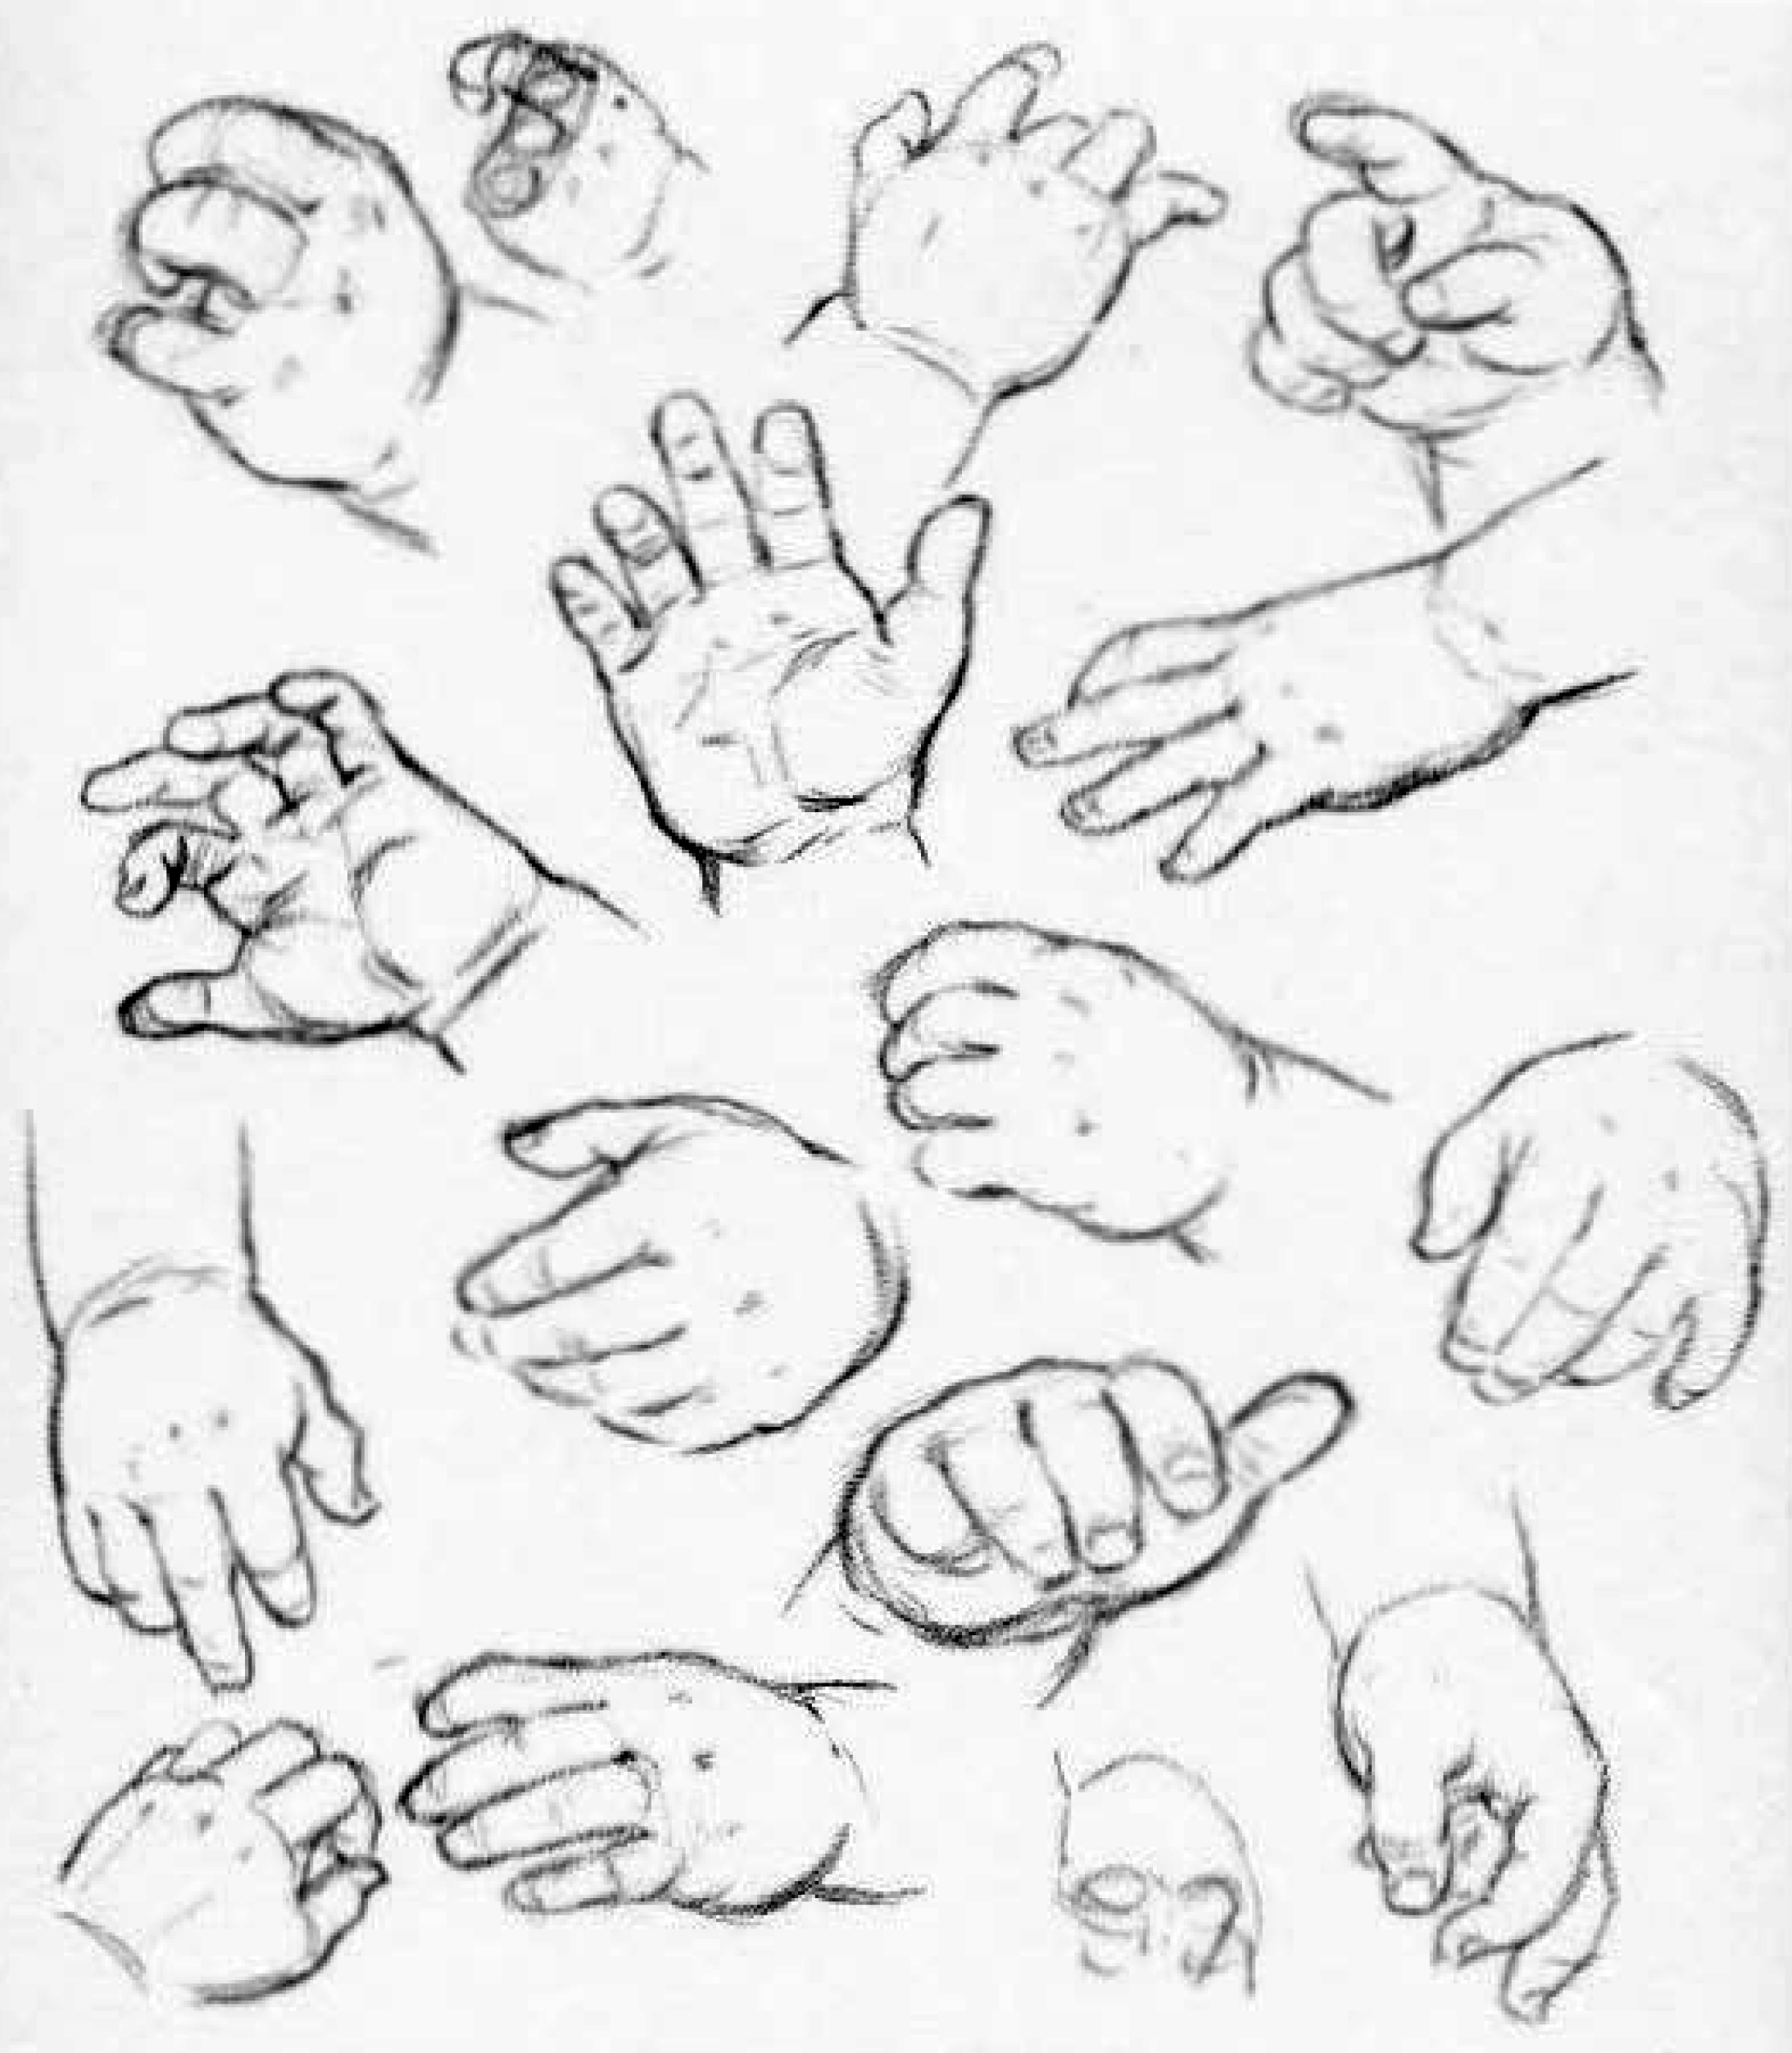 how to draw baby hands - drawing hands of babies